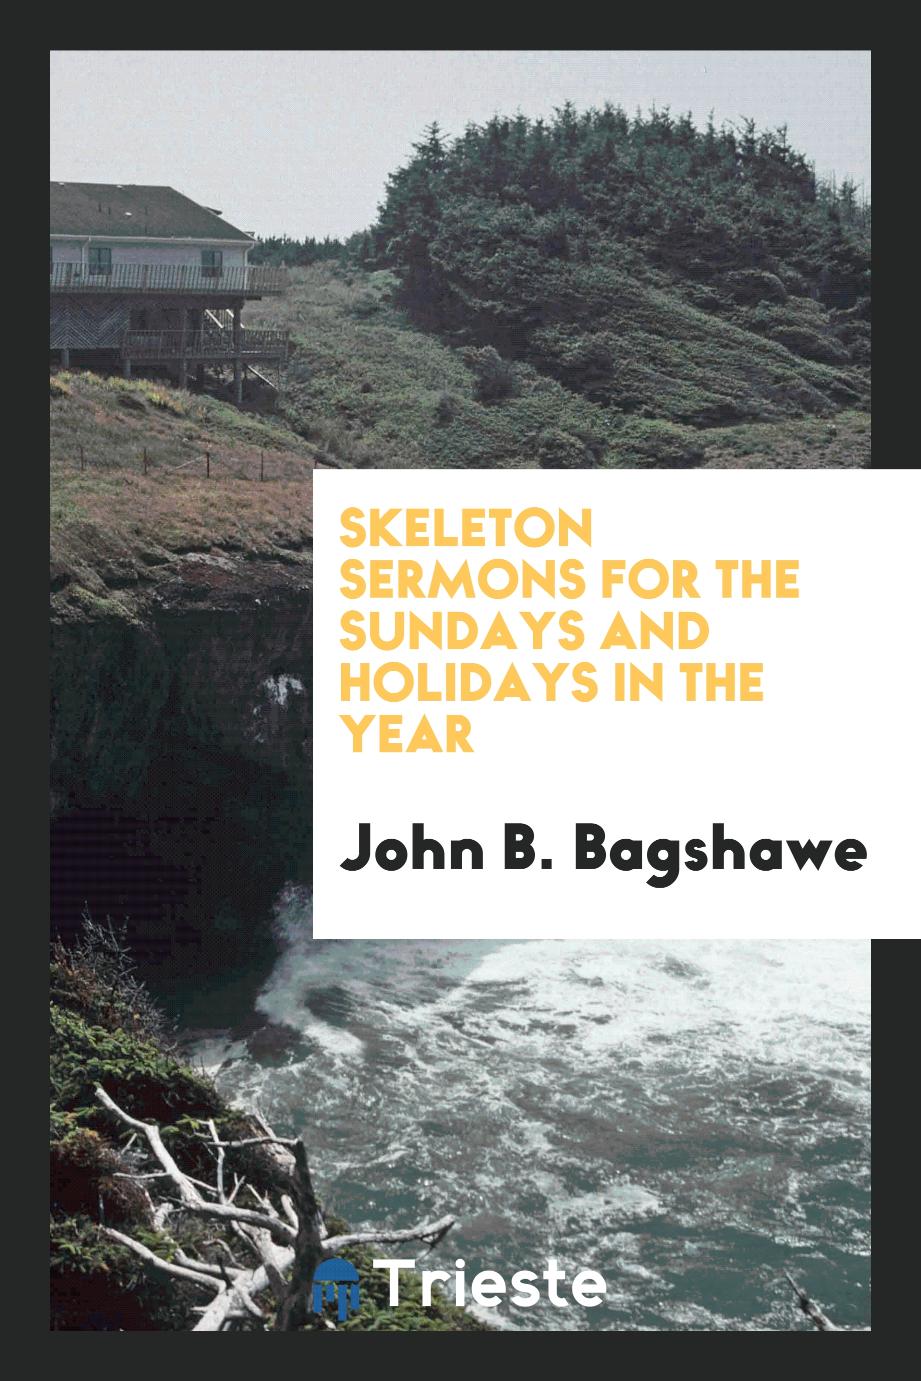 Skeleton sermons for the Sundays and holidays in the year